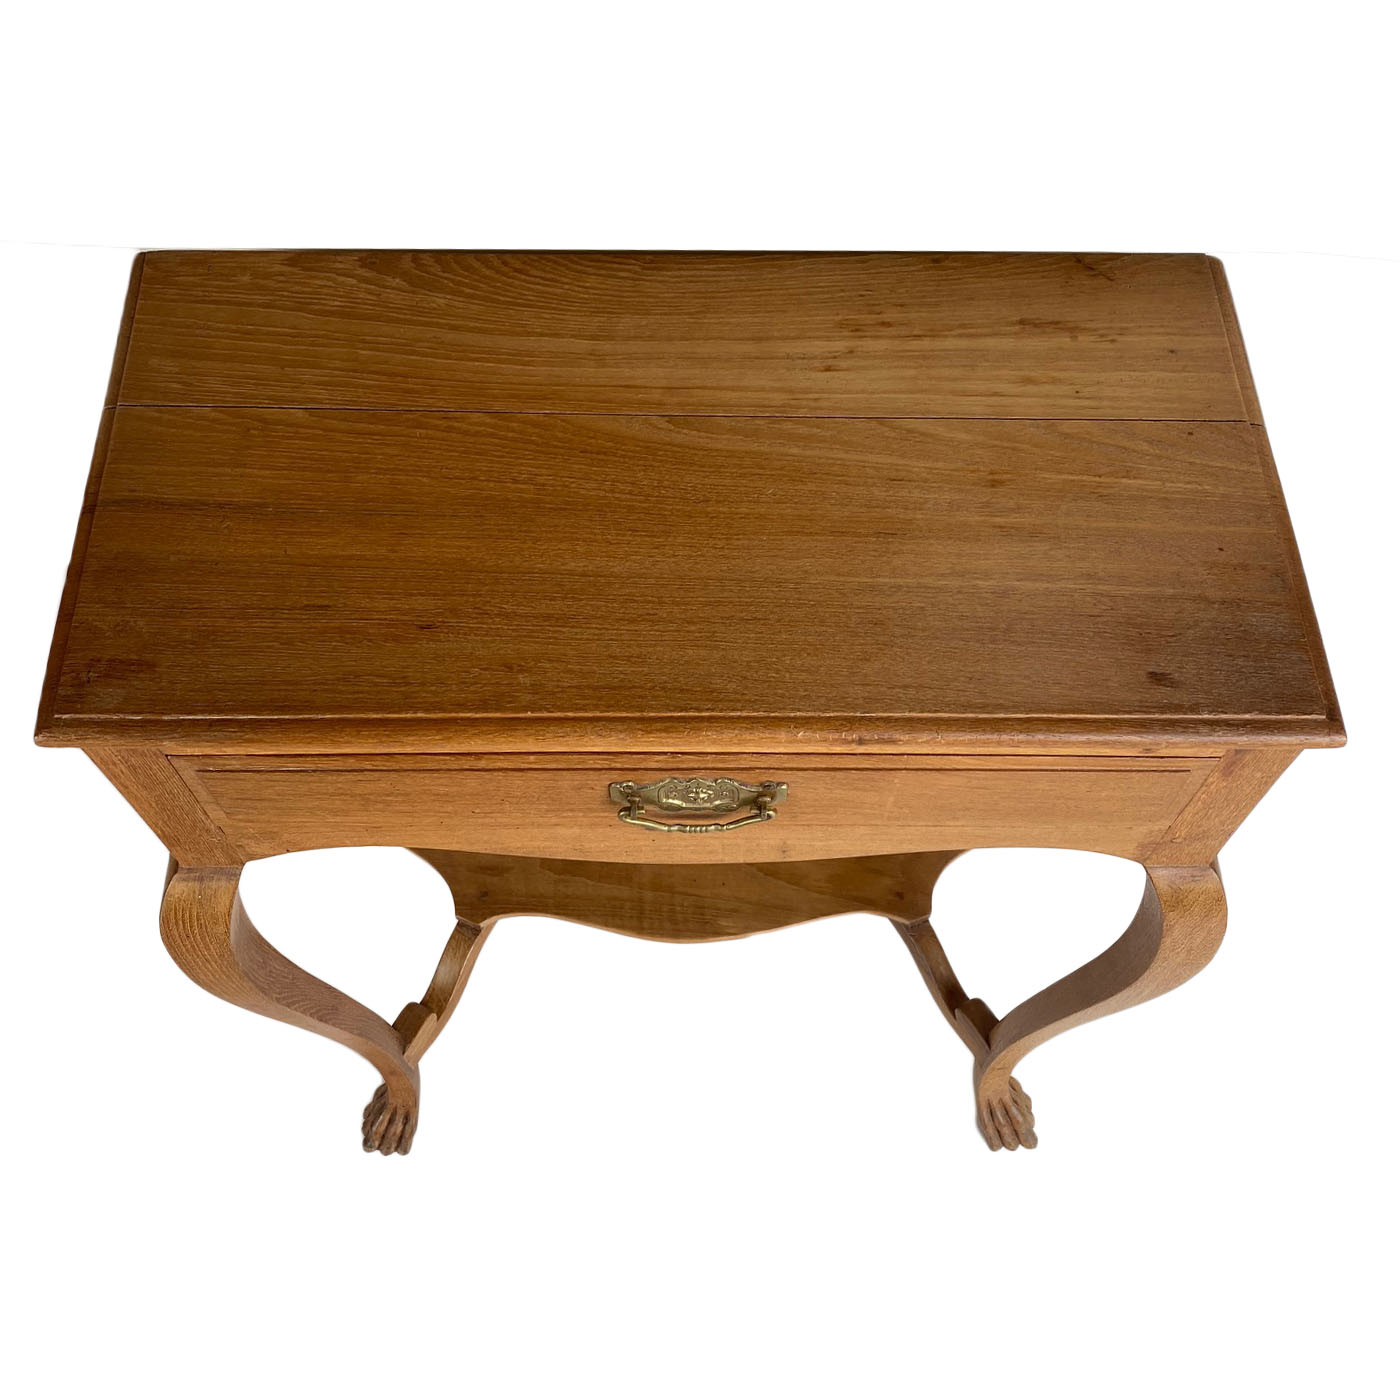 Anglo-Indian Side Table, Medium Tone